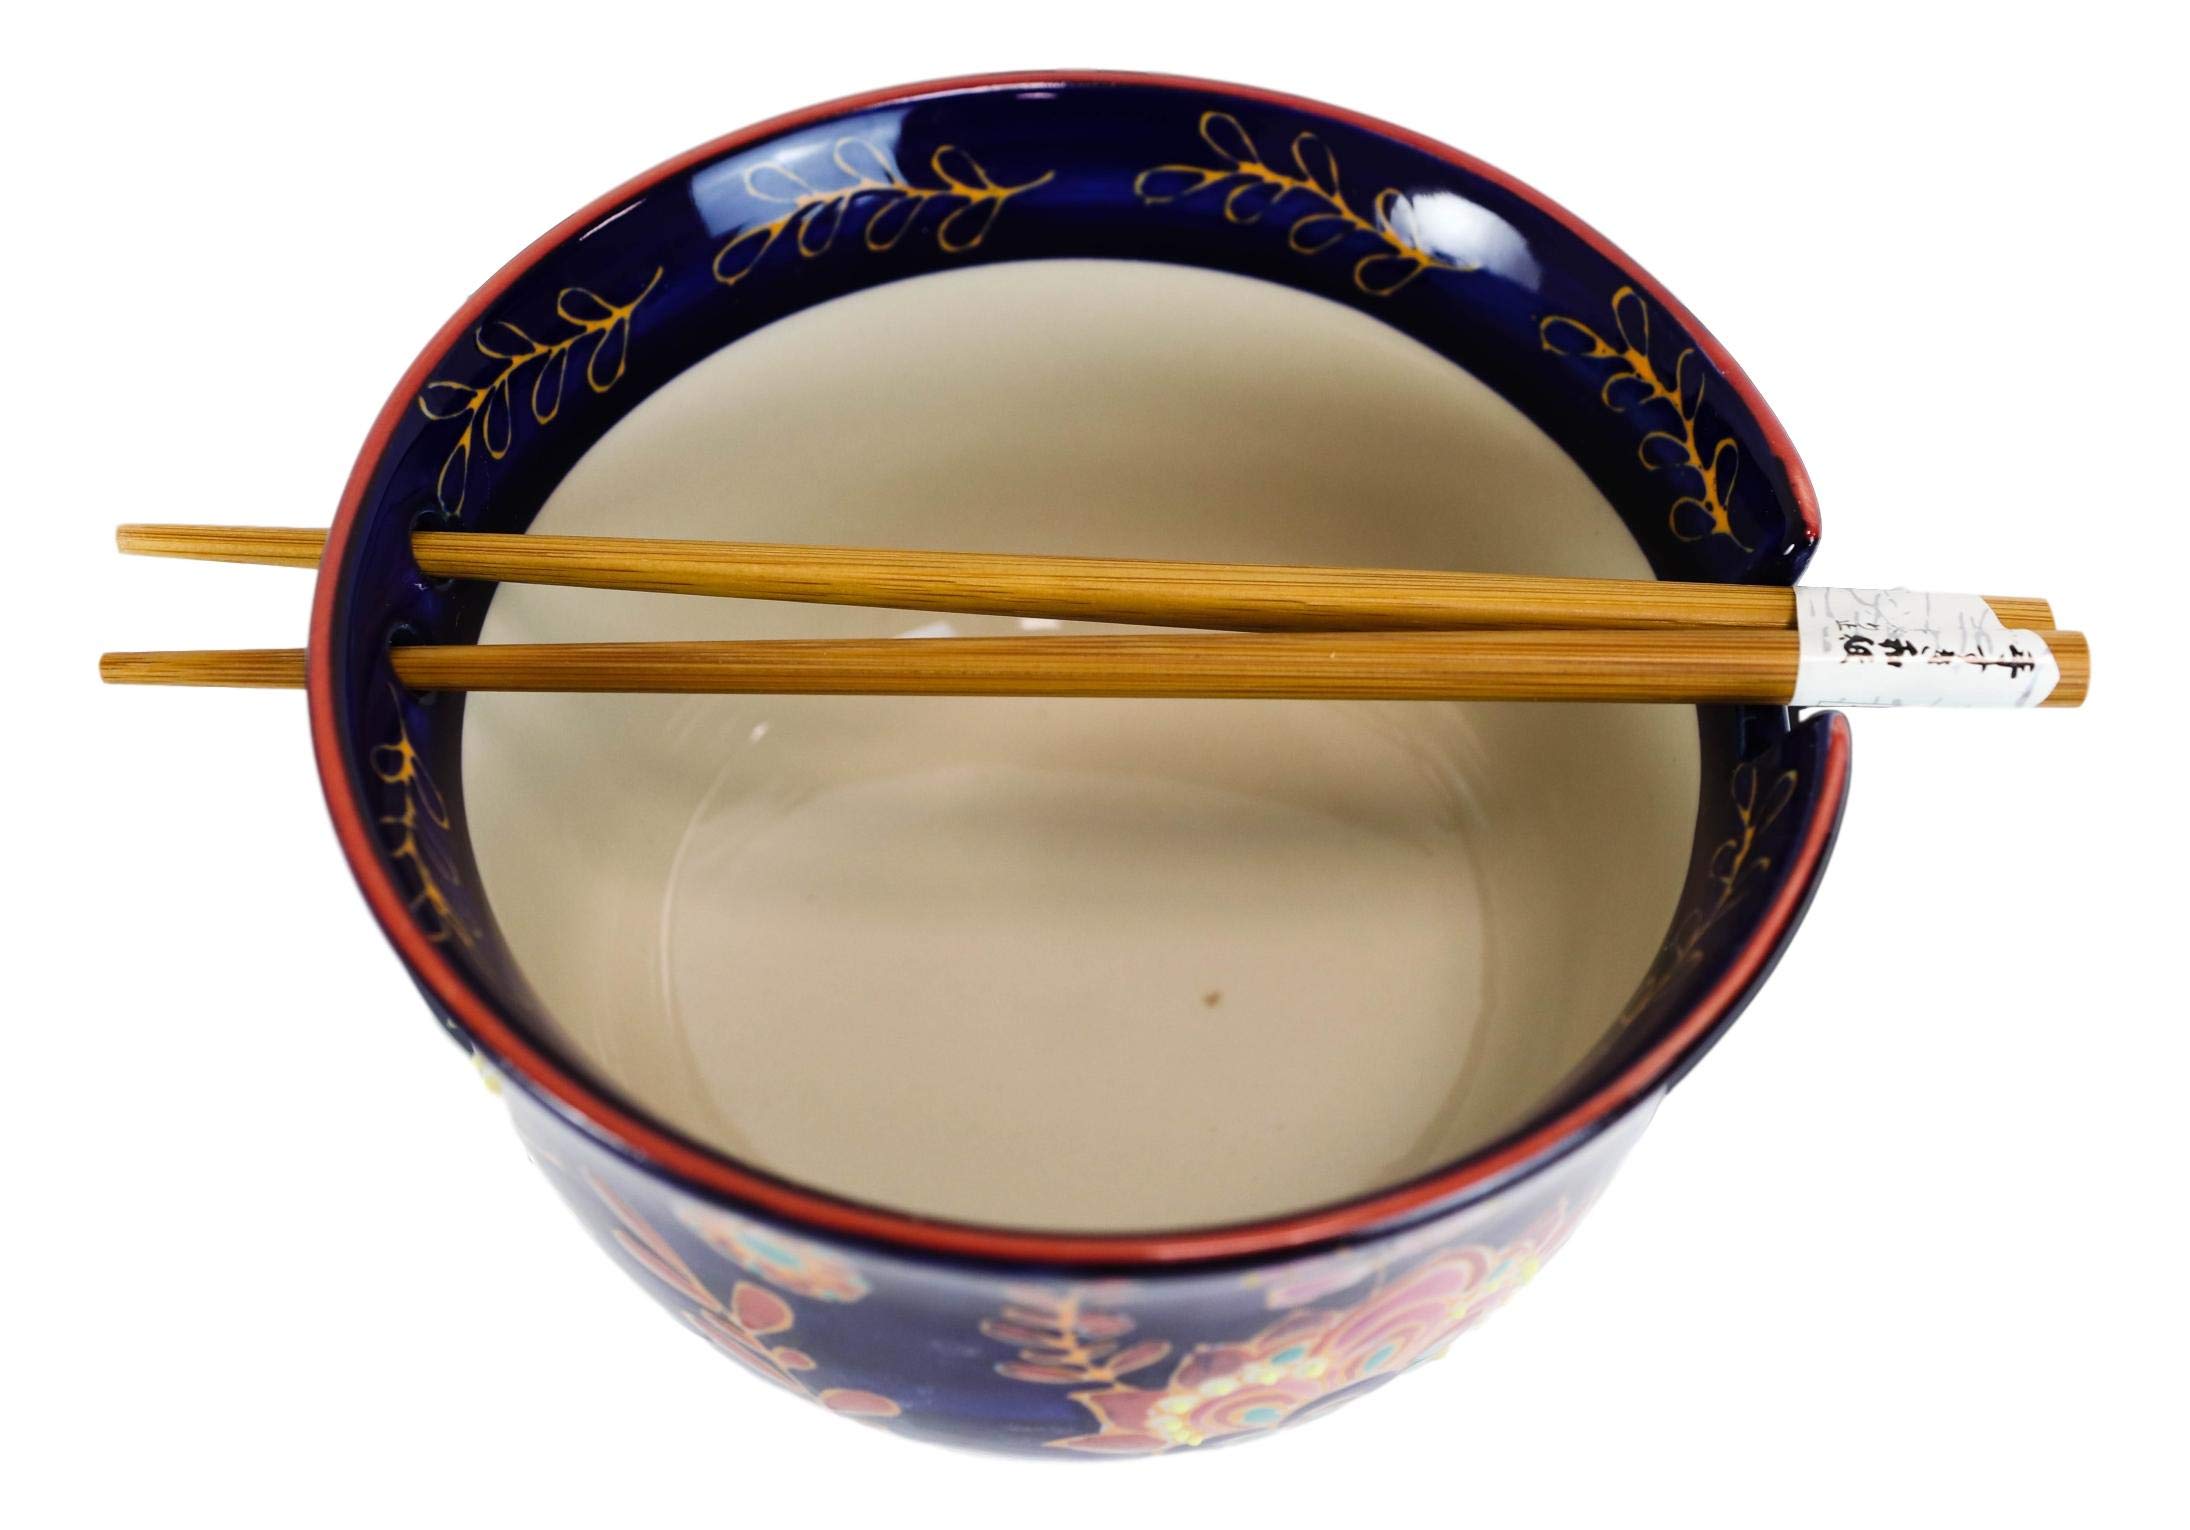 Ebros Midnight Purple Mandala Purple Floral Blossoms Ramen Udon Noodles Large 6.25"D Soup Bowl With Bamboo Chopsticks And Built In Rest Set for Asian Dining Rice Meal Bowls Decor Kitchen